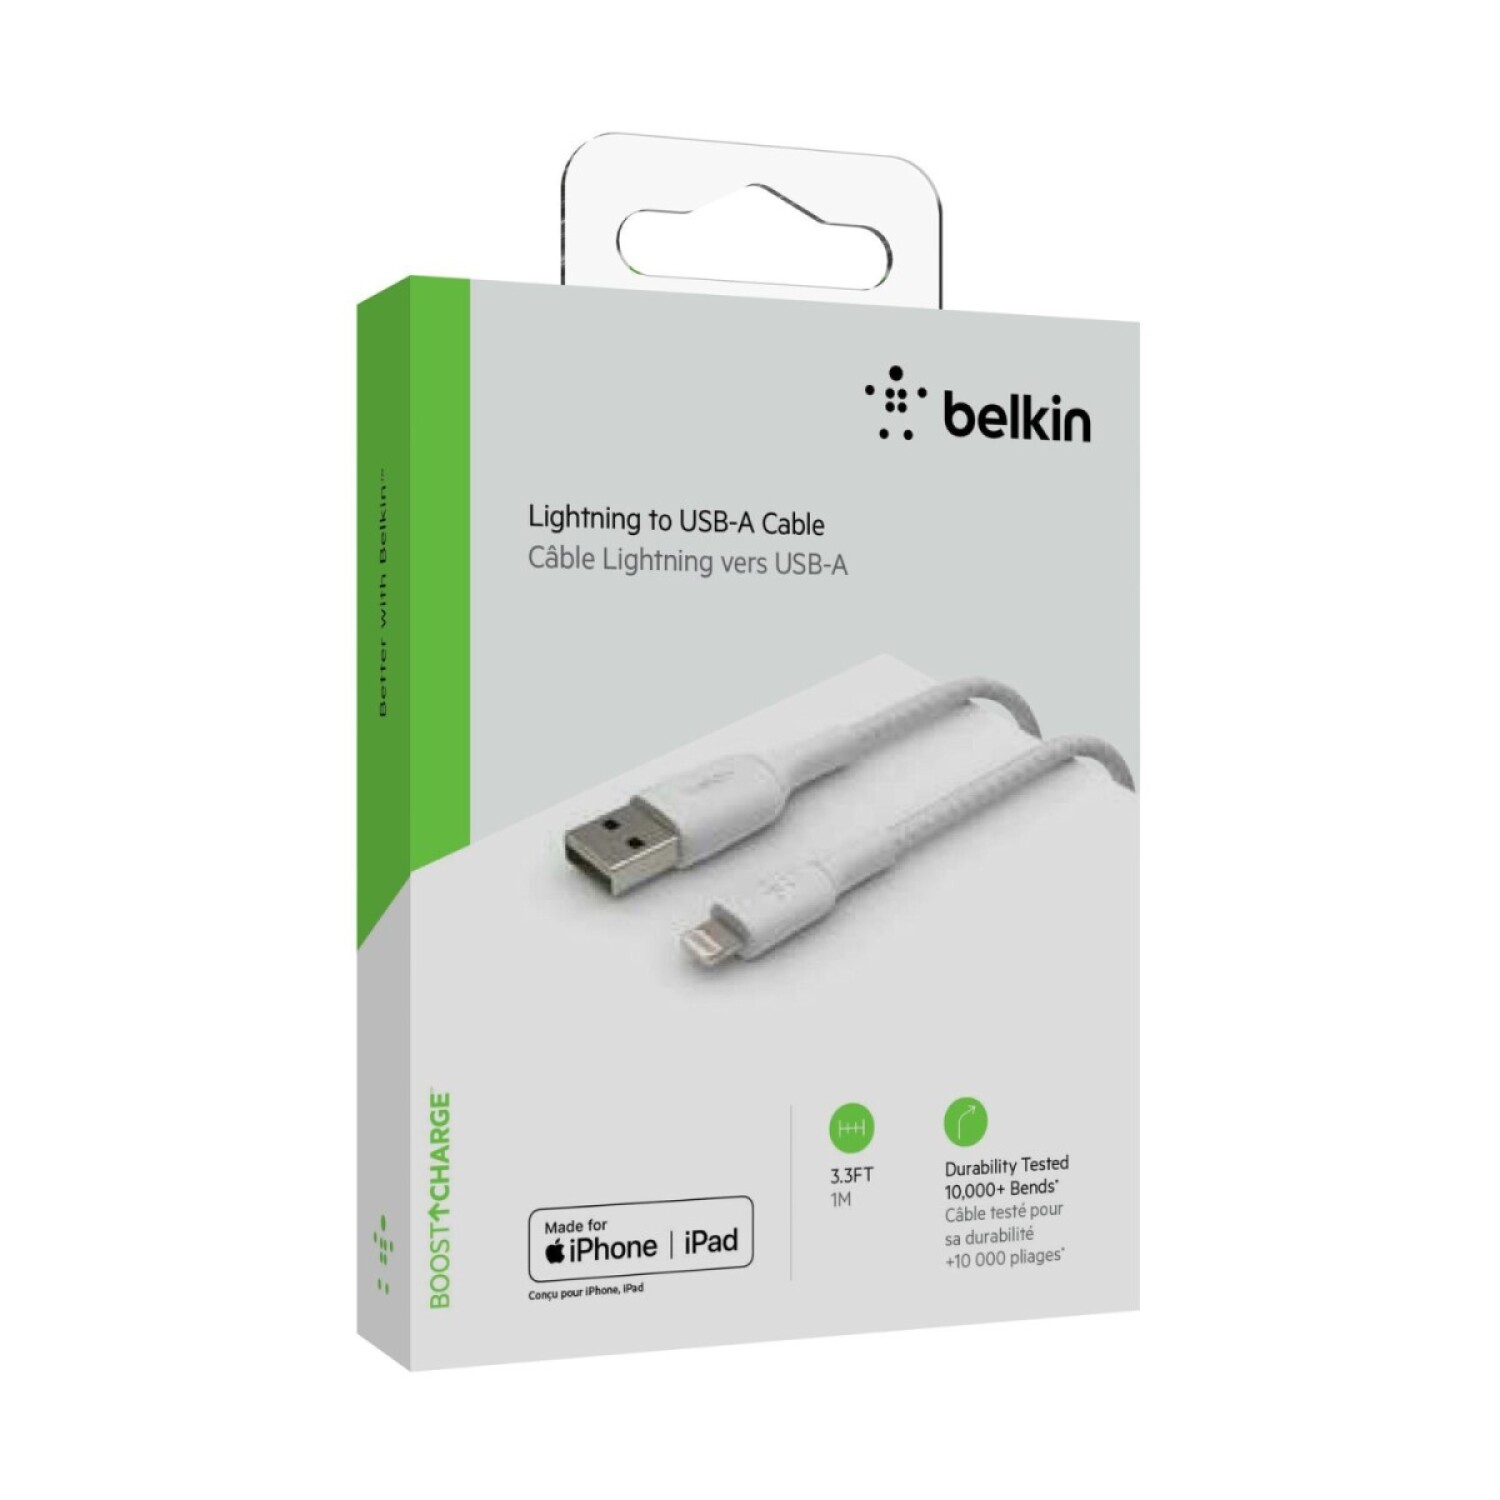 Cable USB-A a Lightning 1 m - Blanco - Cables Lightning